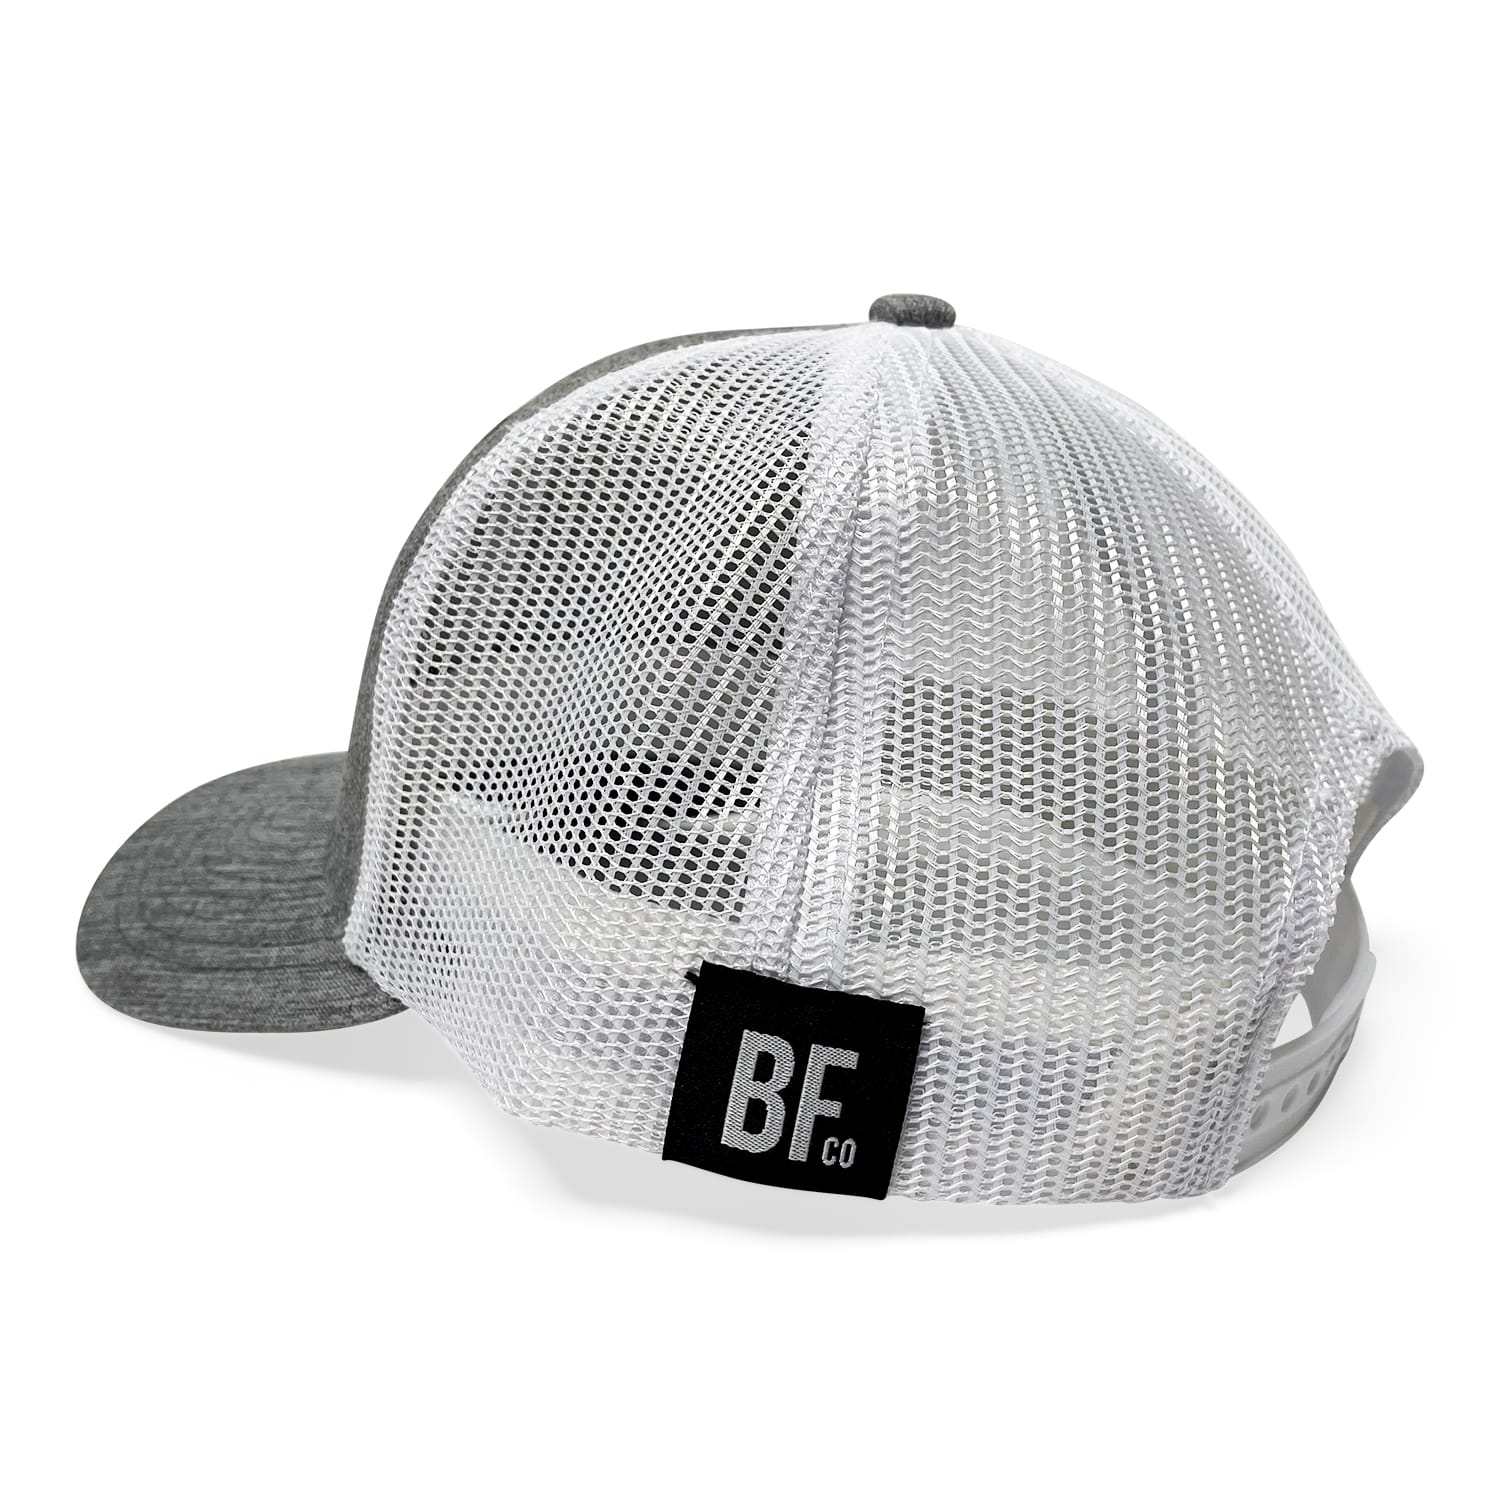 The low profile trucker hat maintains the iconic mesh back of its predecessor but features a shallower crown for a sleeker and more modern appearance. 